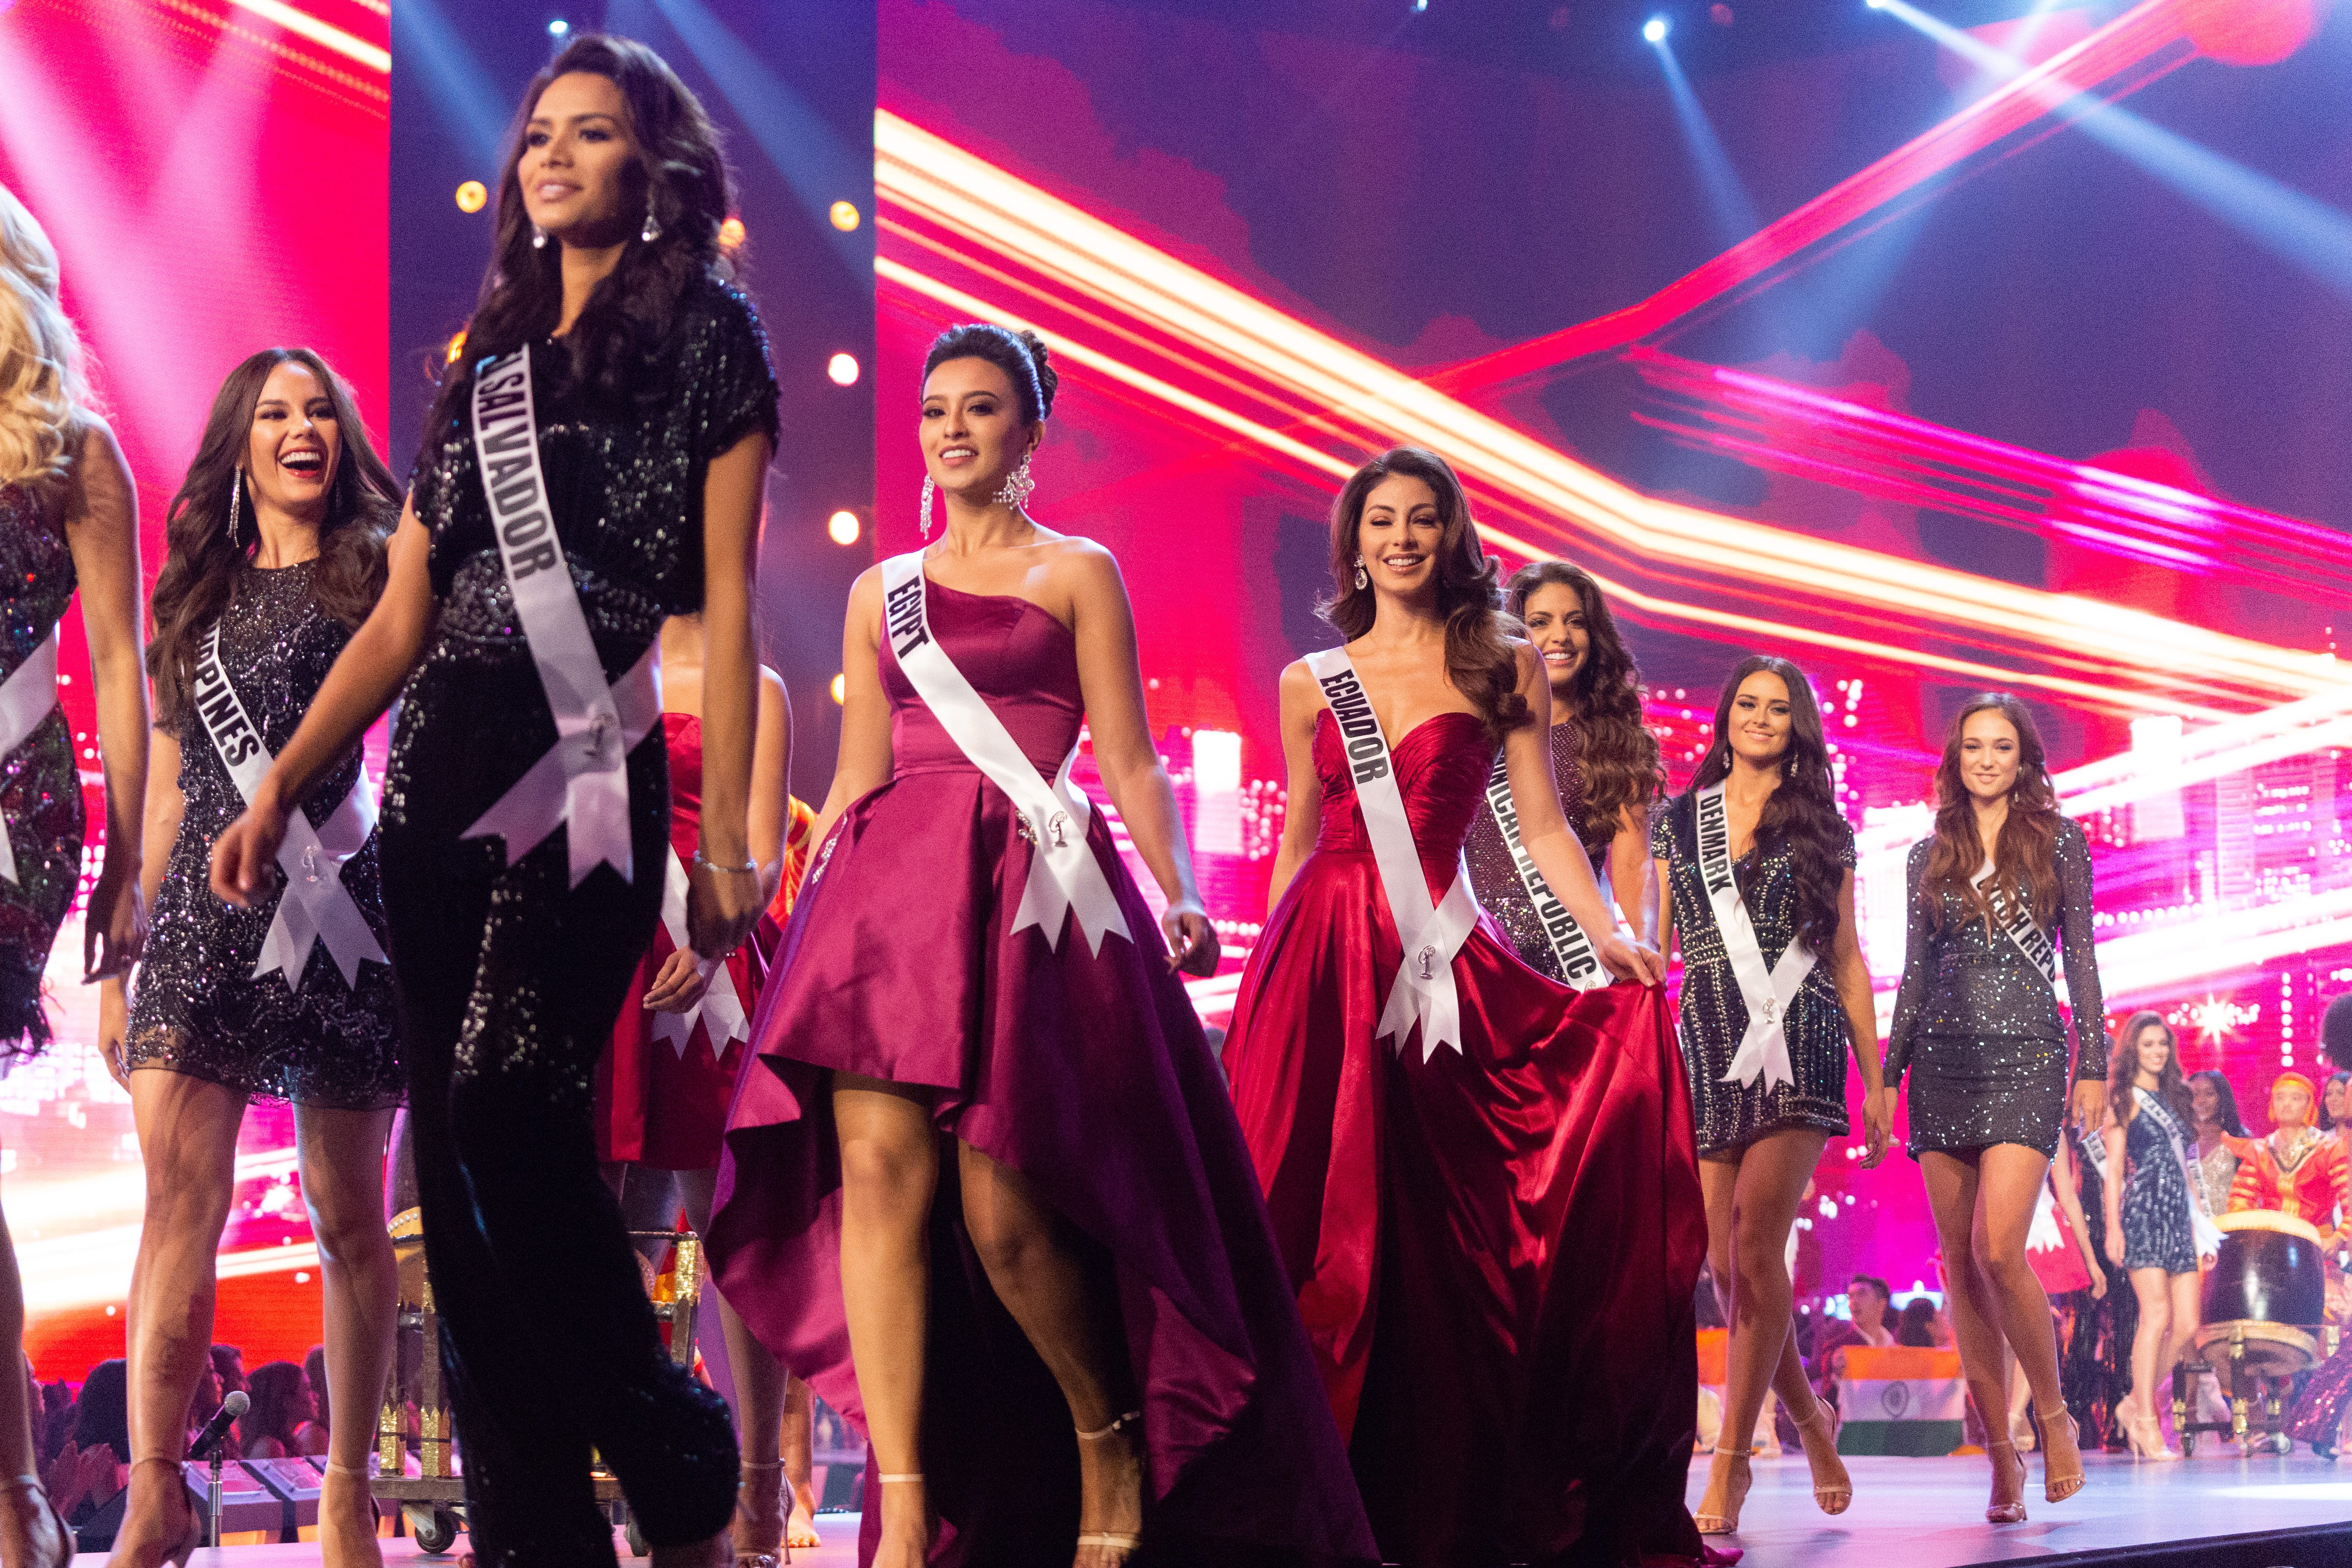 OPENING. Catriona Gray, Miss Philippines 2018; Marisela De Montecristo, Miss El Salvador 2018; Nariman Khaled, Miss Egypt 2018; Virginia Limongi, Miss Ecuador 2018; Aldy Bernard, Miss Dominican Republic 2018; Helena Heuser, Miss Denmark 2018; and Lea Steflickova, Miss Czech Republic 2018; on stage in fashion by Sherri Hill during the opening of Miss Universe. Photo by the Miss Universe Organization 